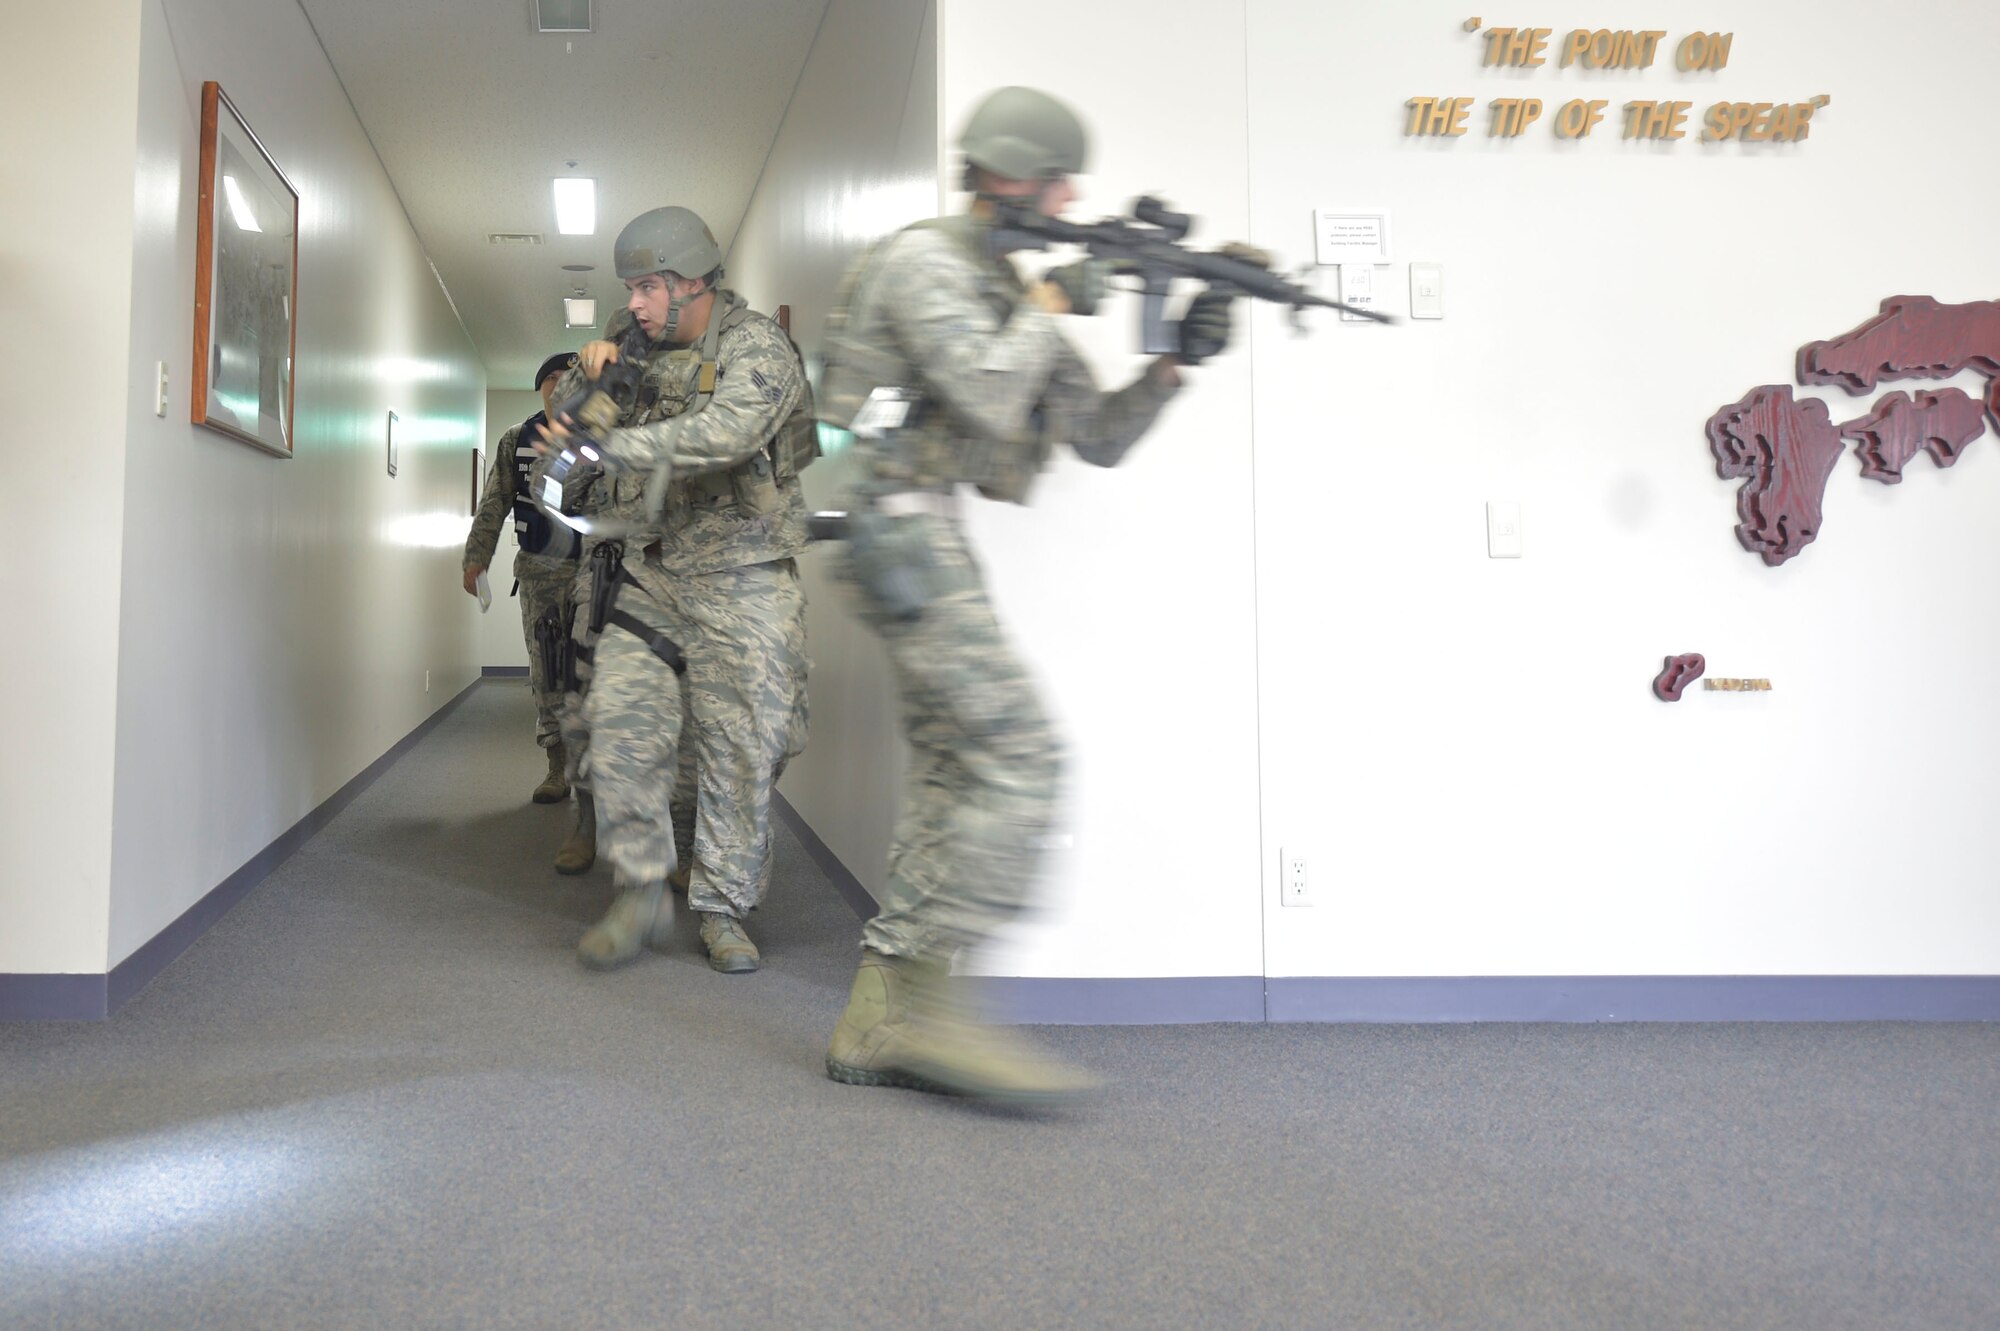 U.S. Air Force Senior Airman Daniel Anders, left, and Airman 1st Class Michael Curran, right, both 35th Security Forces Squadron defenders, perform a search of the Tori building during an active shooter exercise at Misawa Air Base, Sept. 18, 2018. Active shooter exercises are held to test base safety and security in case of a real-world scenario. (U.S. Air Force photo by Tech. Sgt. Stephany Johnson)